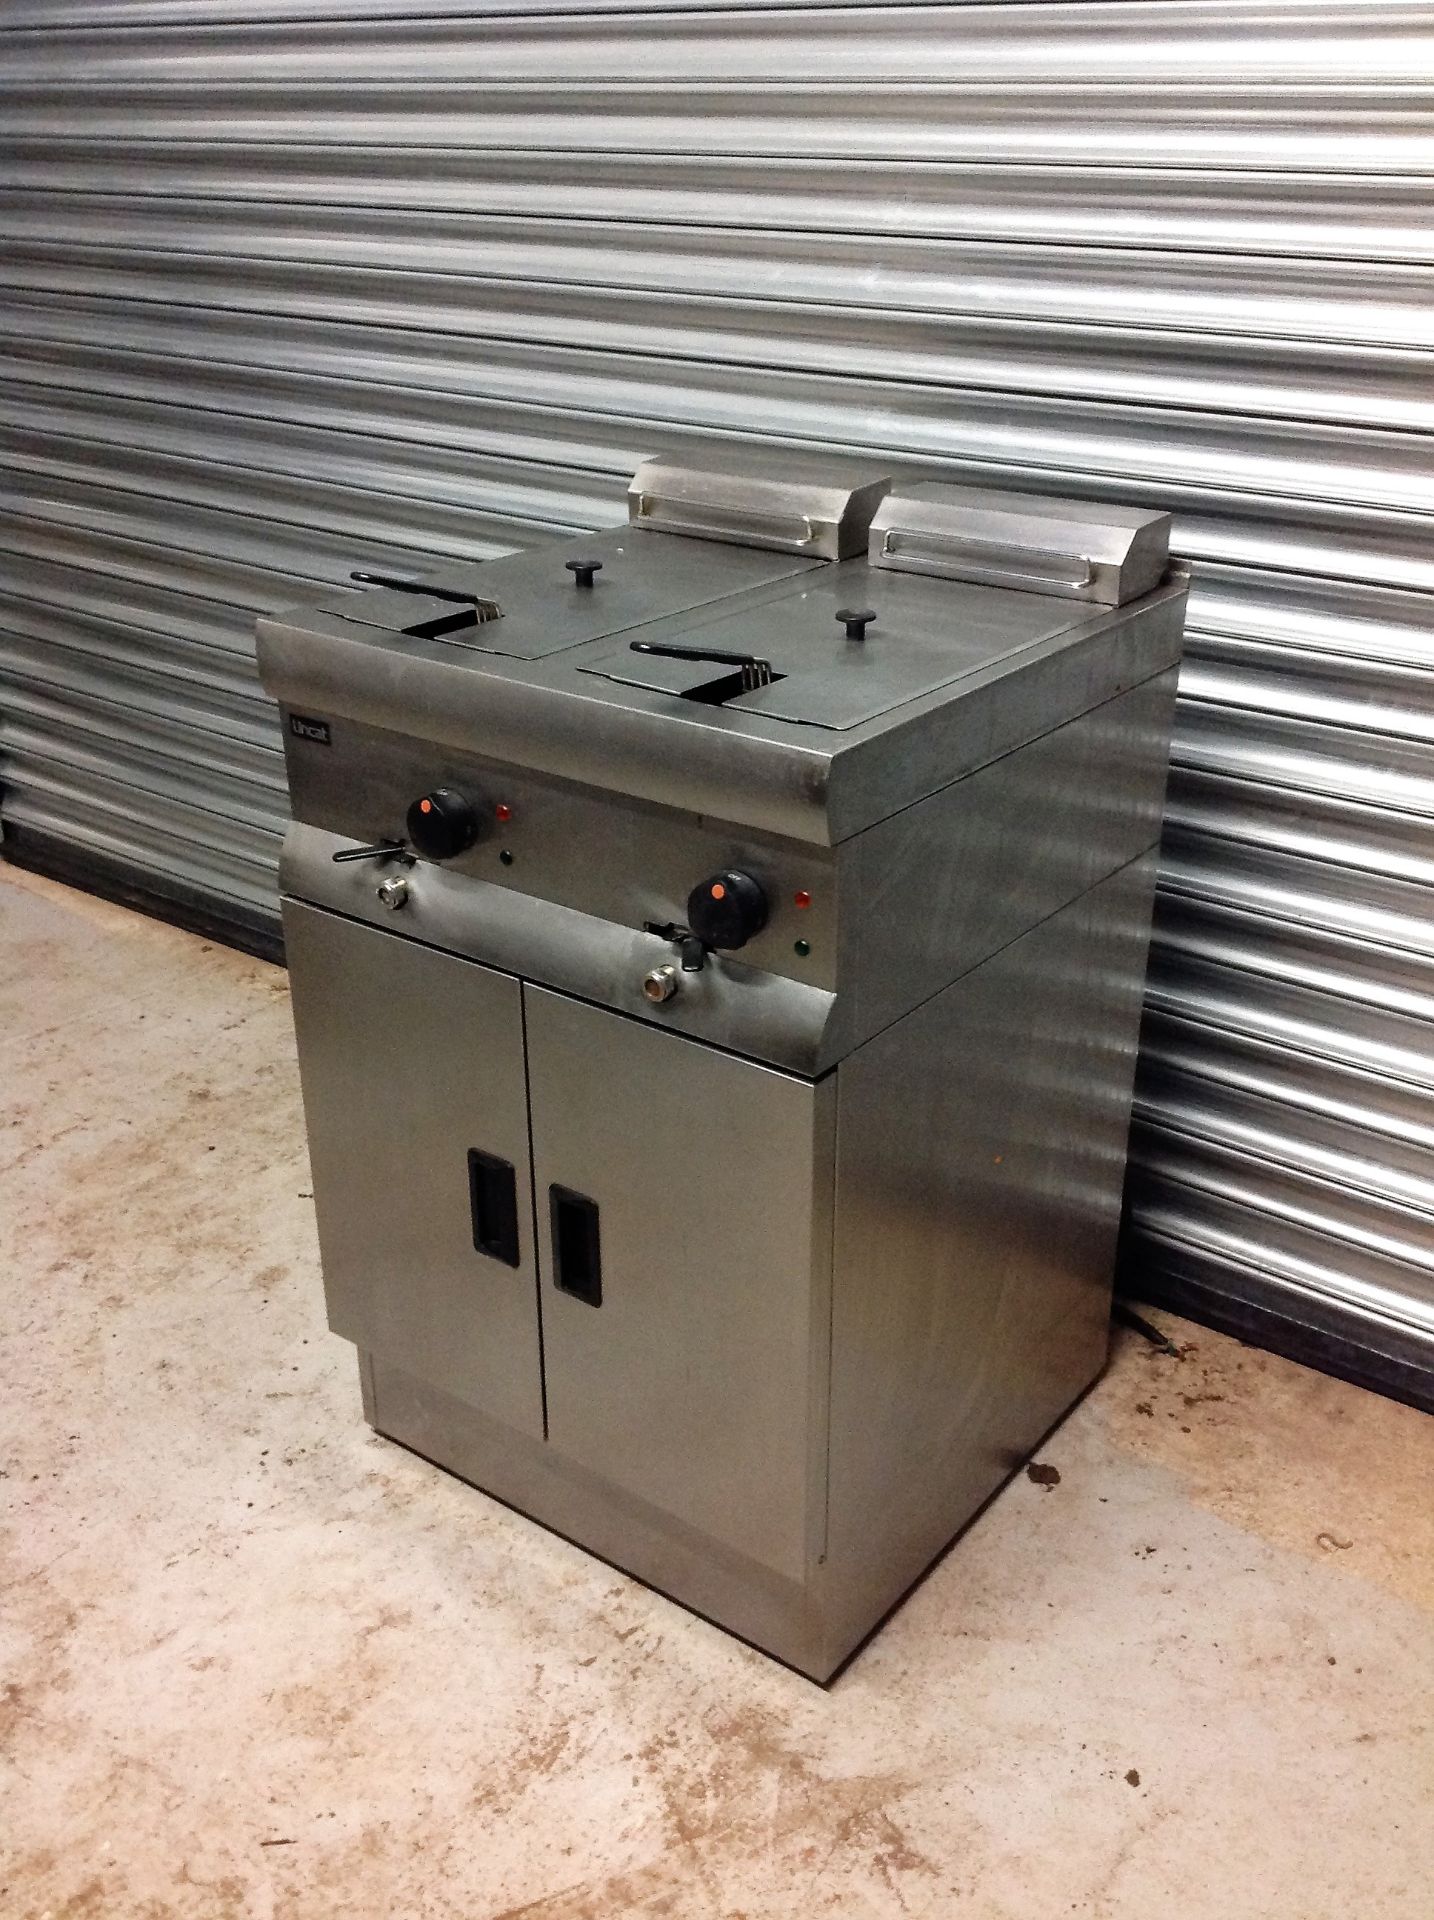 Lincat Stainless Steel Double Deep Fat Fryer With Under Cupboard And Oil Bucket/Nozzle